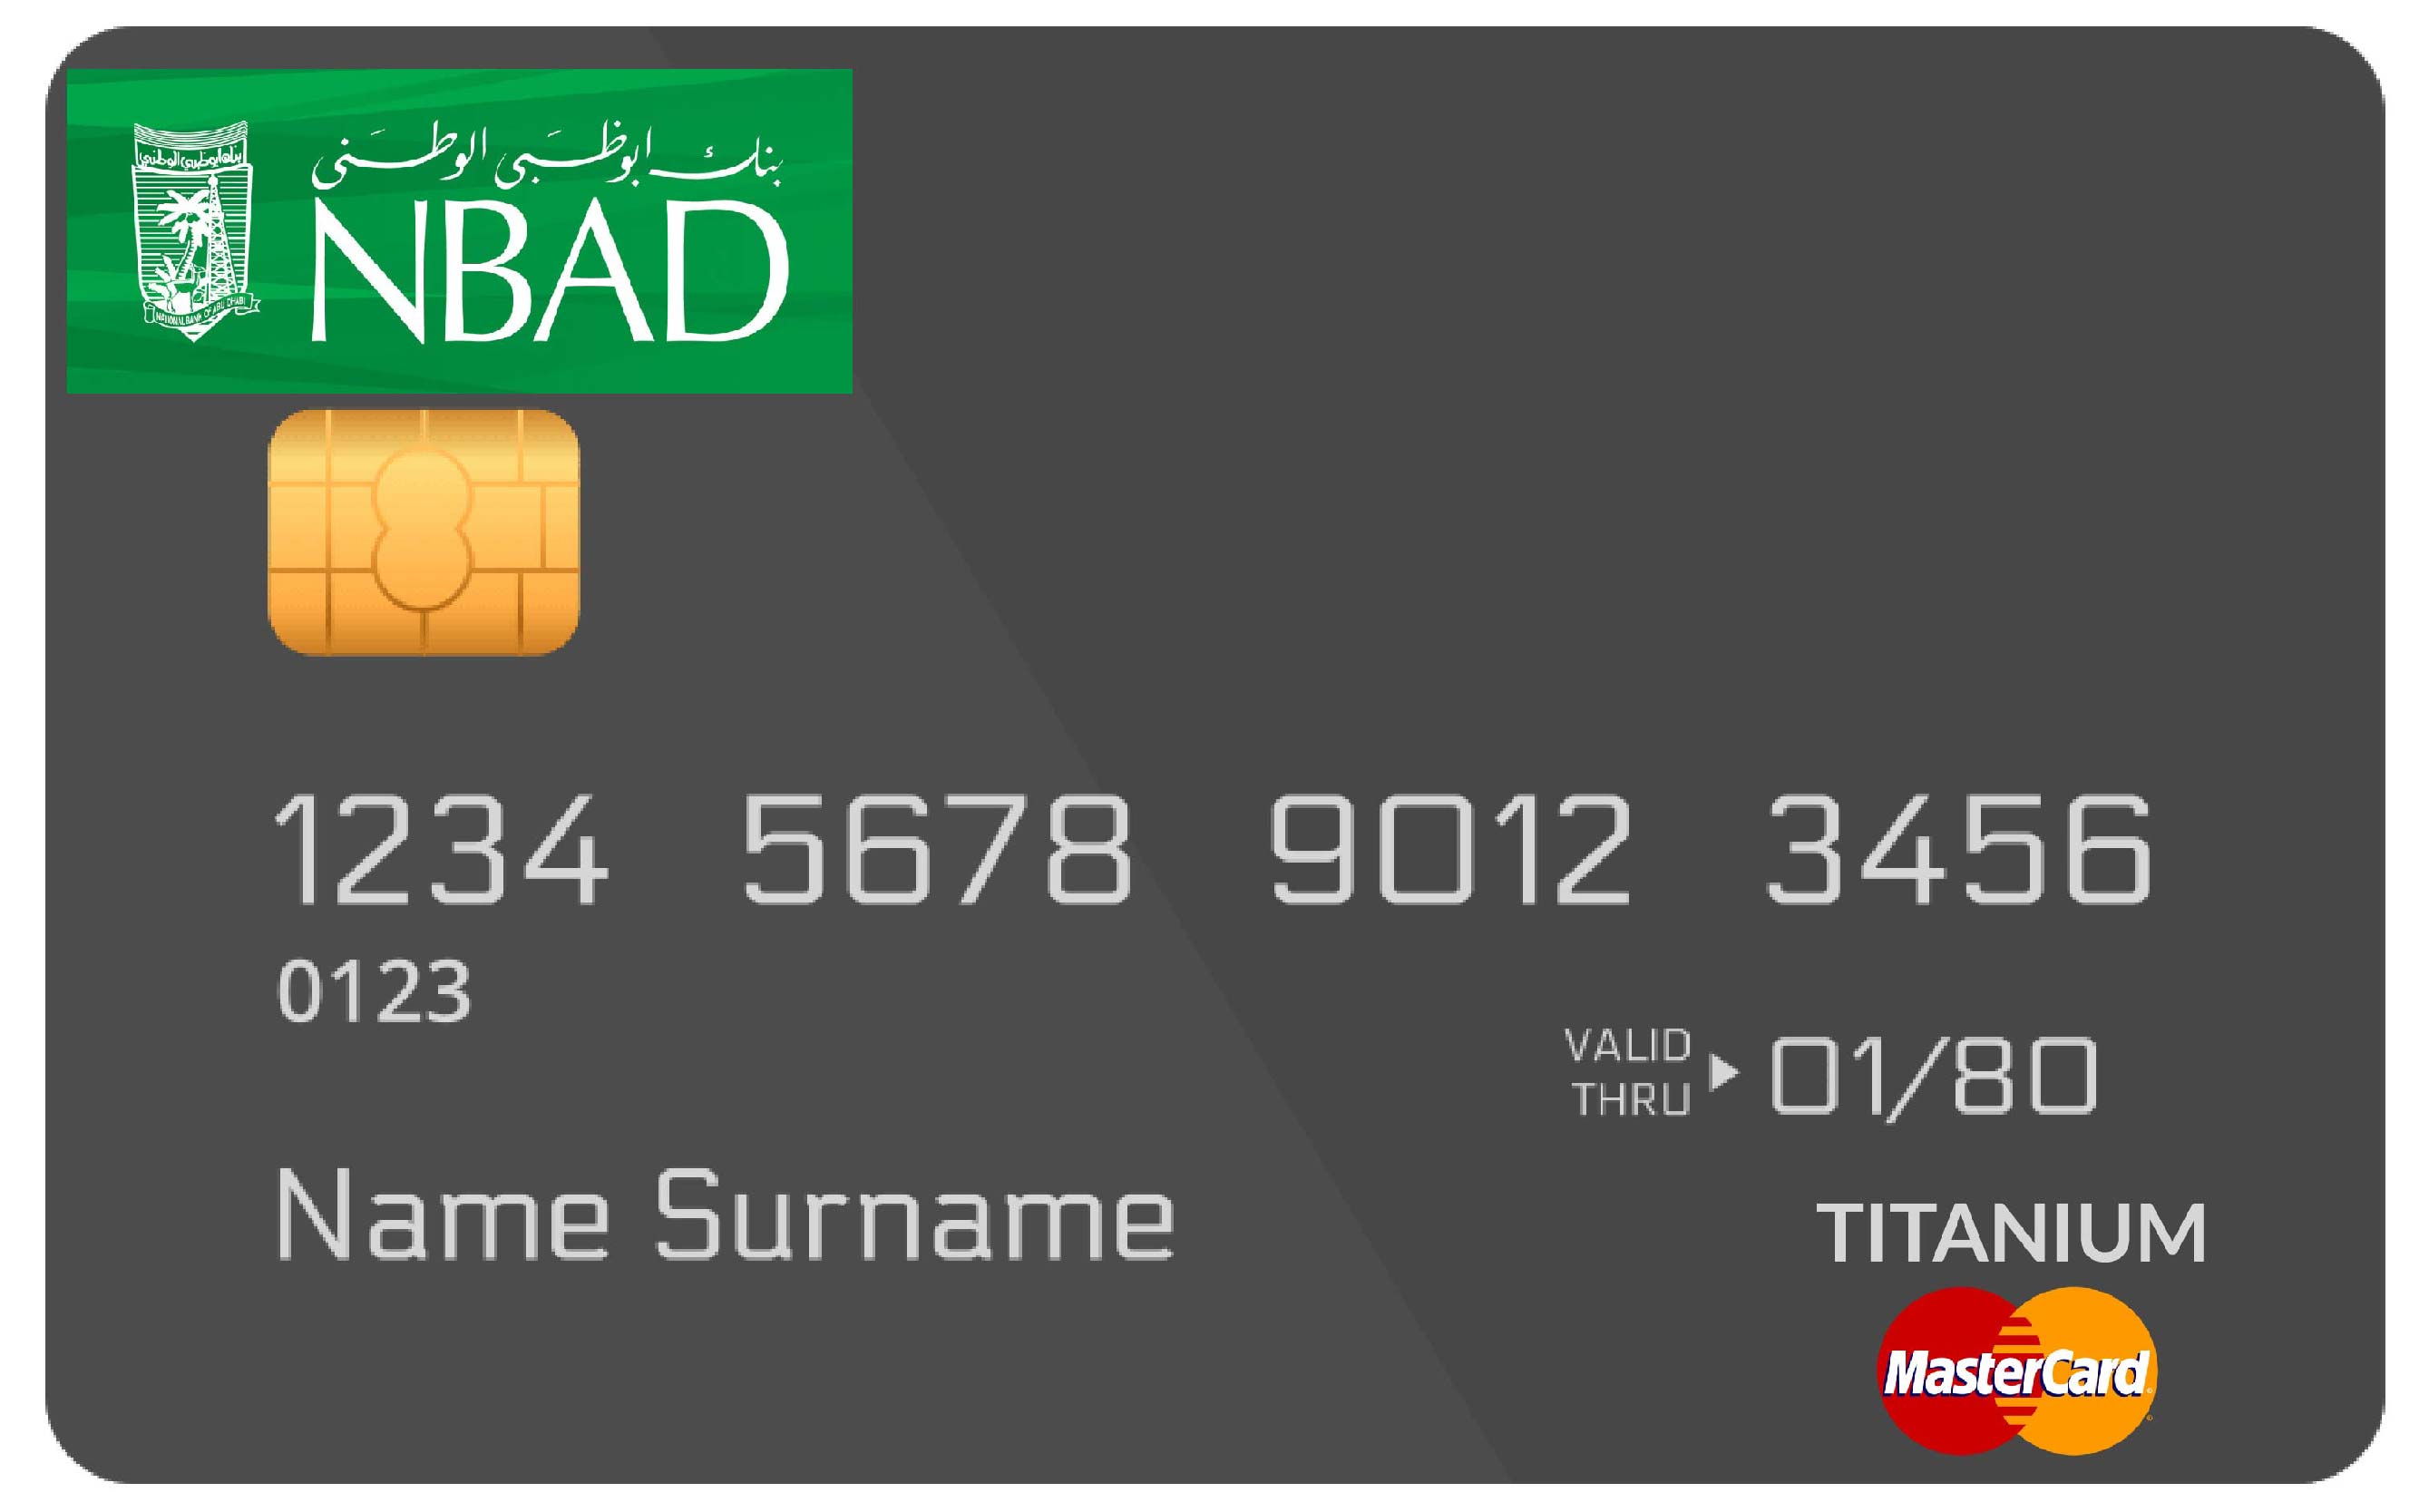 Top 10 credit cards that you can consider in UAE - MyMoneySouq Financial Blog